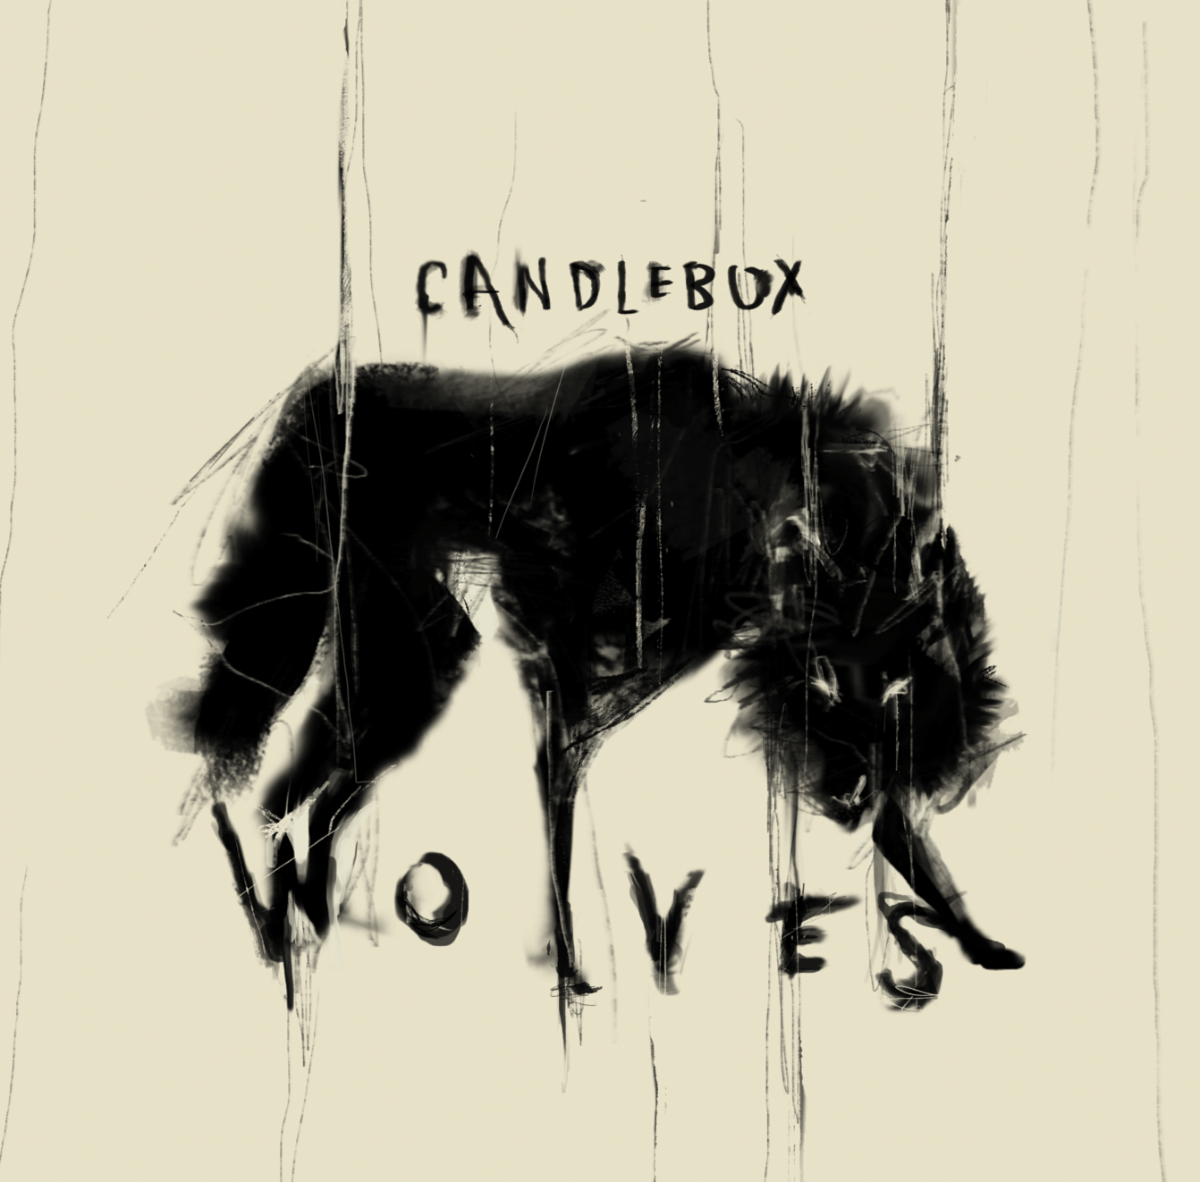 Candlebox Releases Brand New Album 'Wolves'